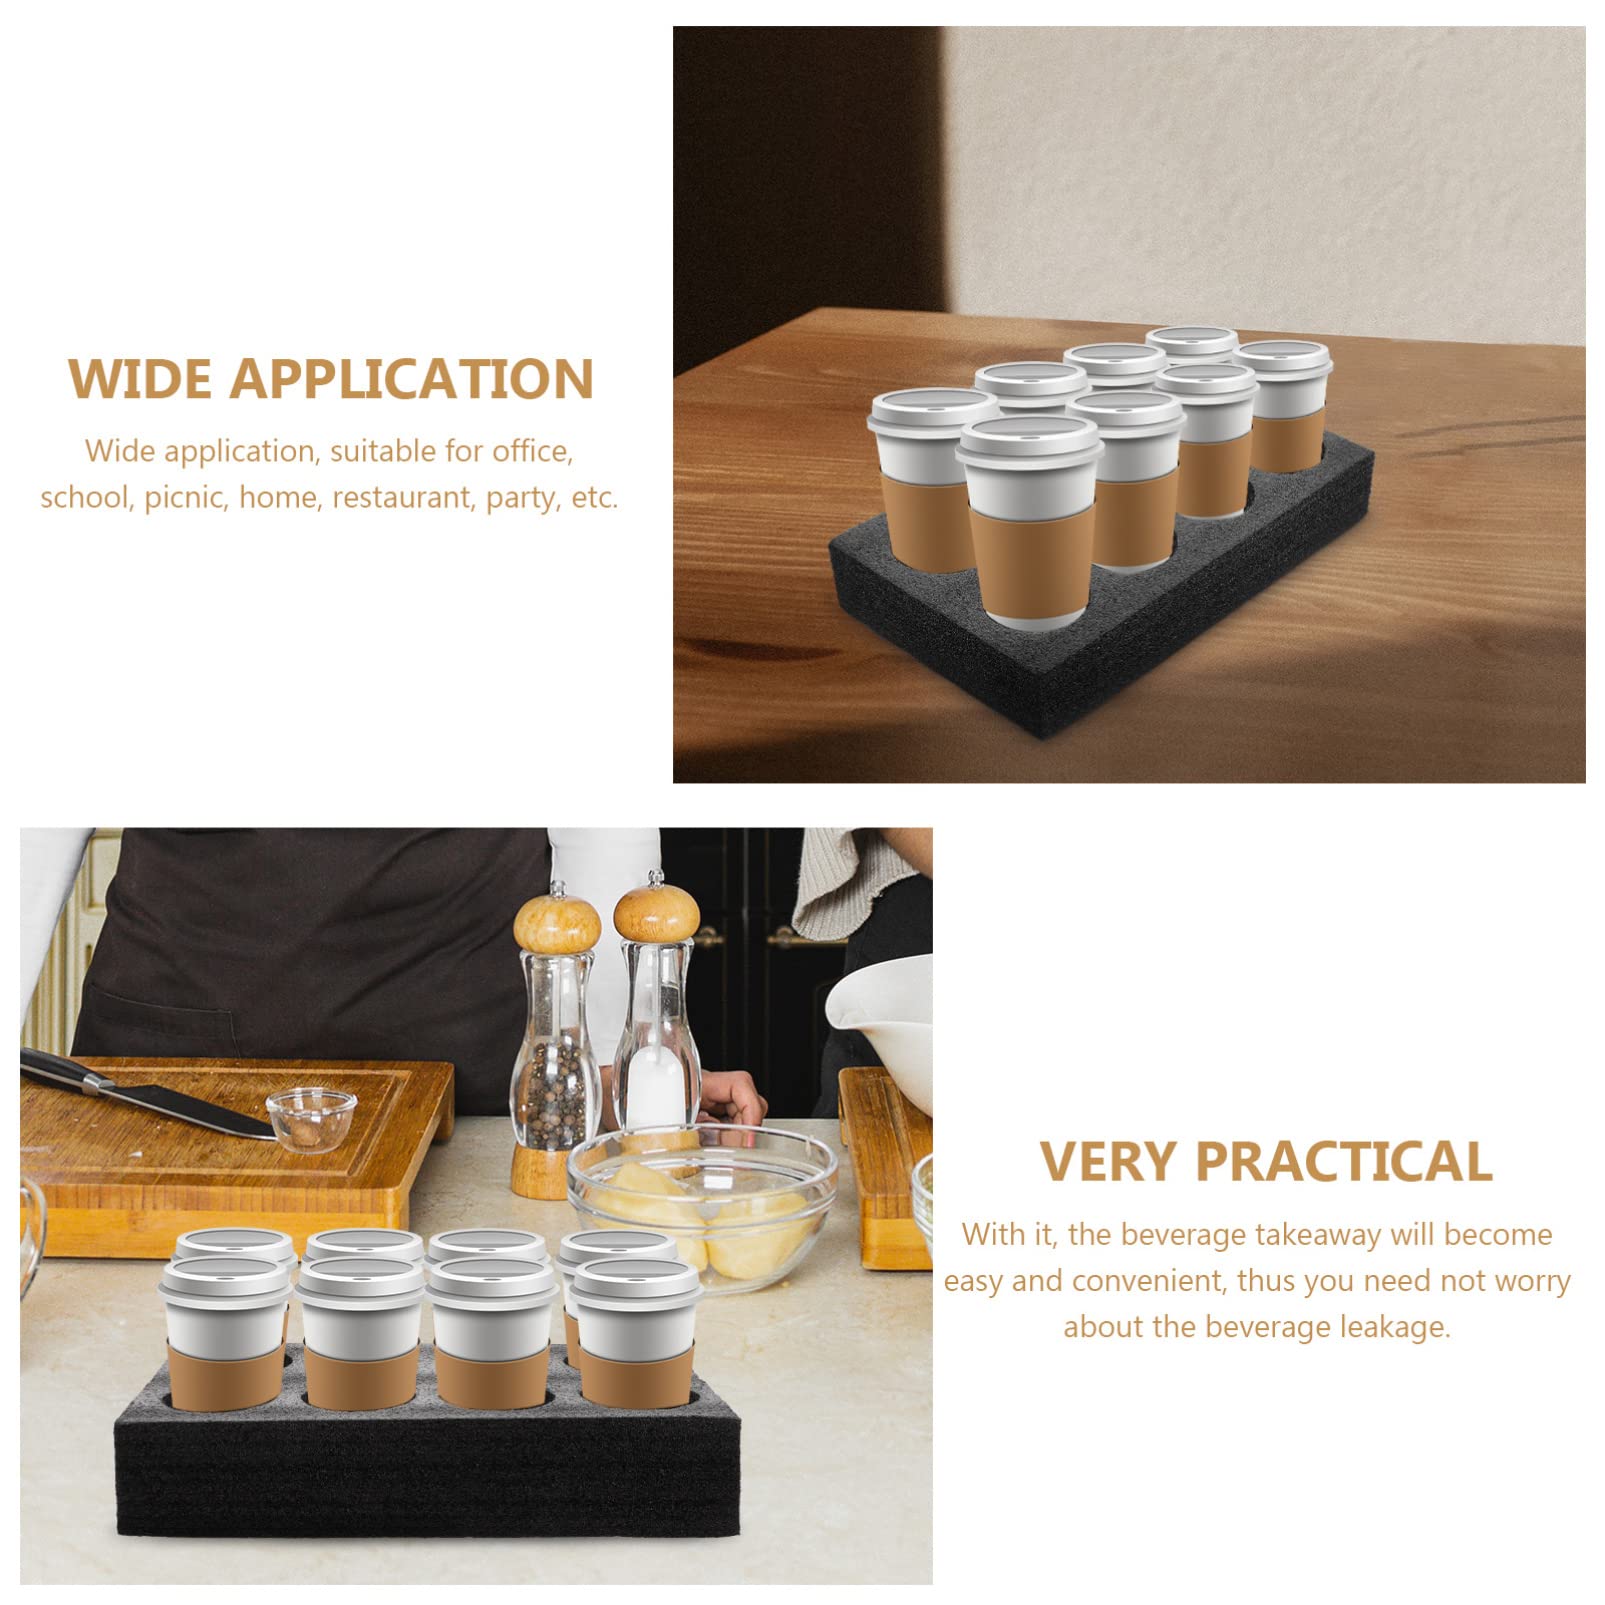 VOSAREA Milk Tea Cup Holder Couch Cup Holder Tray Foam Drink Carrier Drink Tray for Fridge Multiple Cup Tray Pearl Cotton Cup Holder Coffee Cup Carrier Glass Cup Table Travel Universal Epe